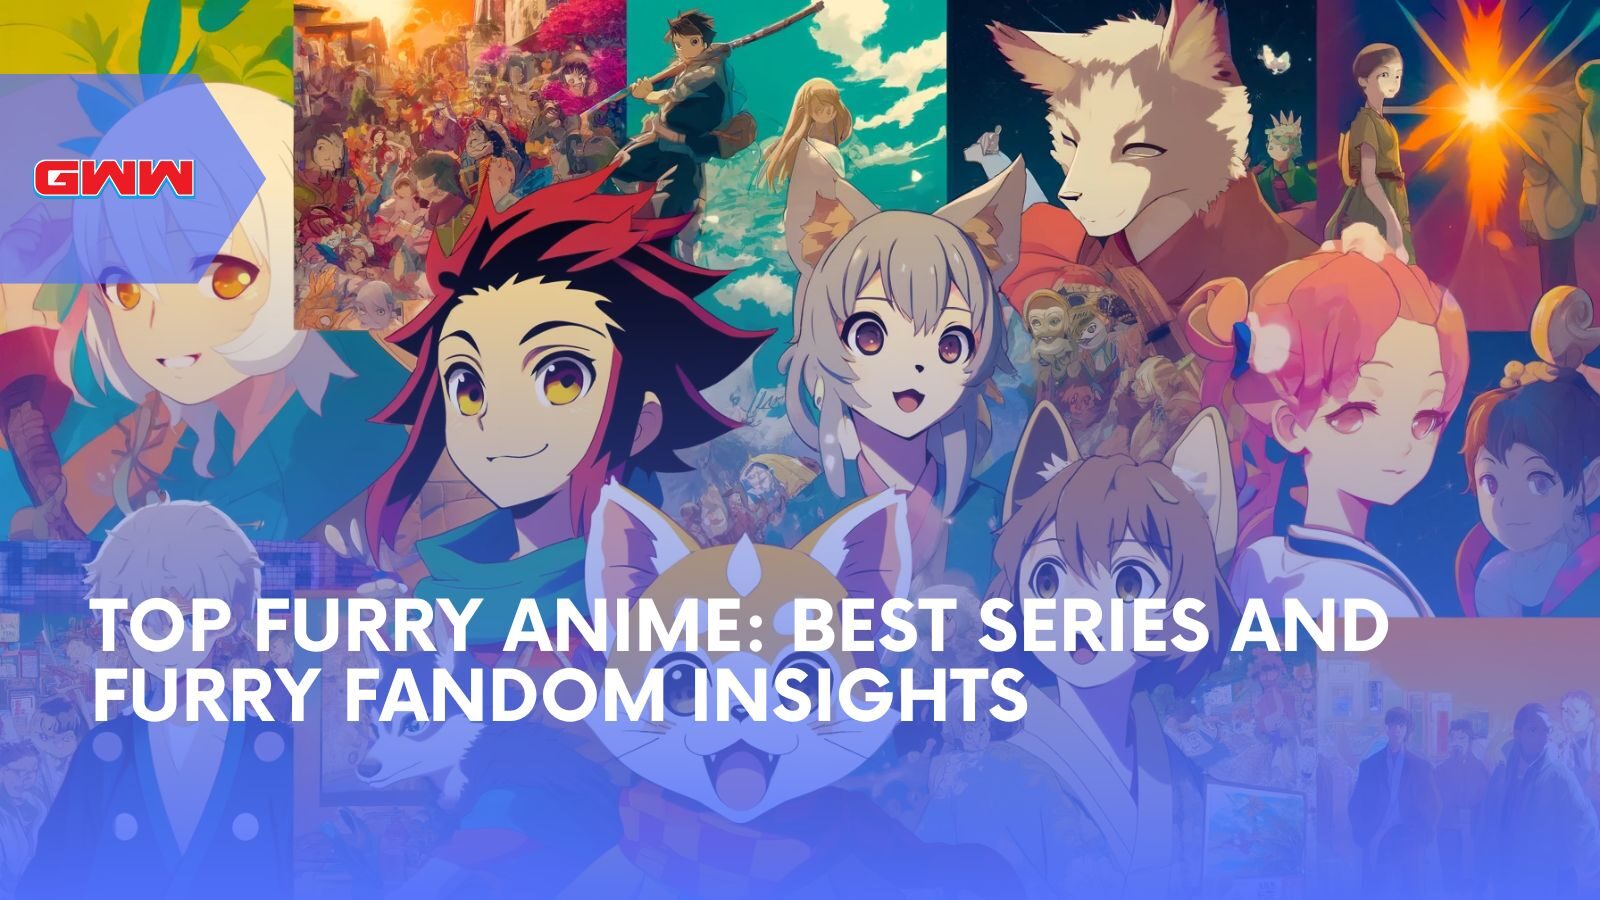 Top Furry Anime: Best Series and Furry Fandom Insights